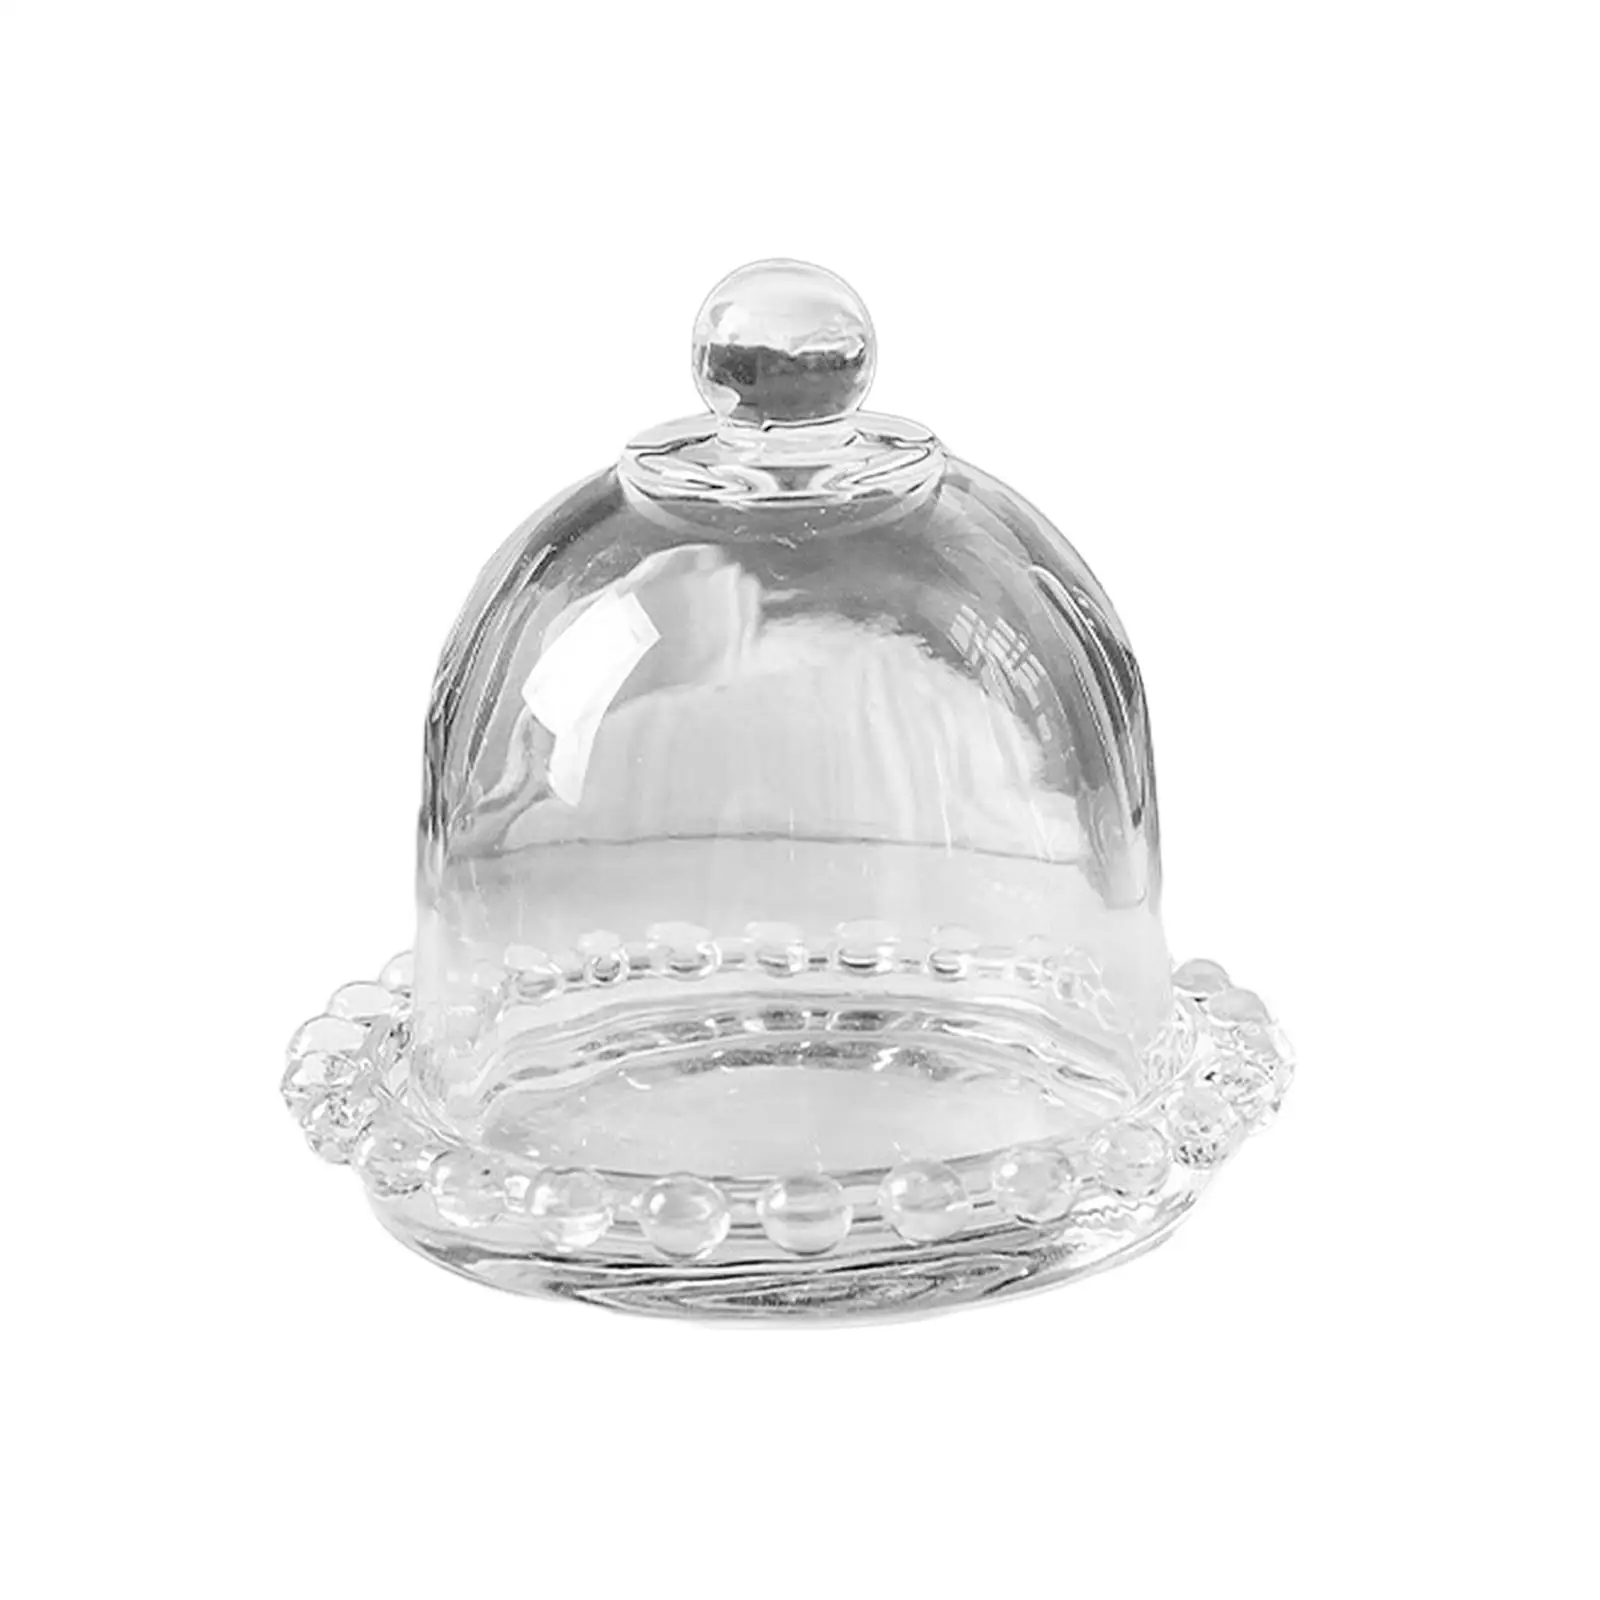 Cake Plate with Cover Glass Dessert Dome with Base Appetizer Plate for Birthday Dessert Shops Home Restaurant Festive Party